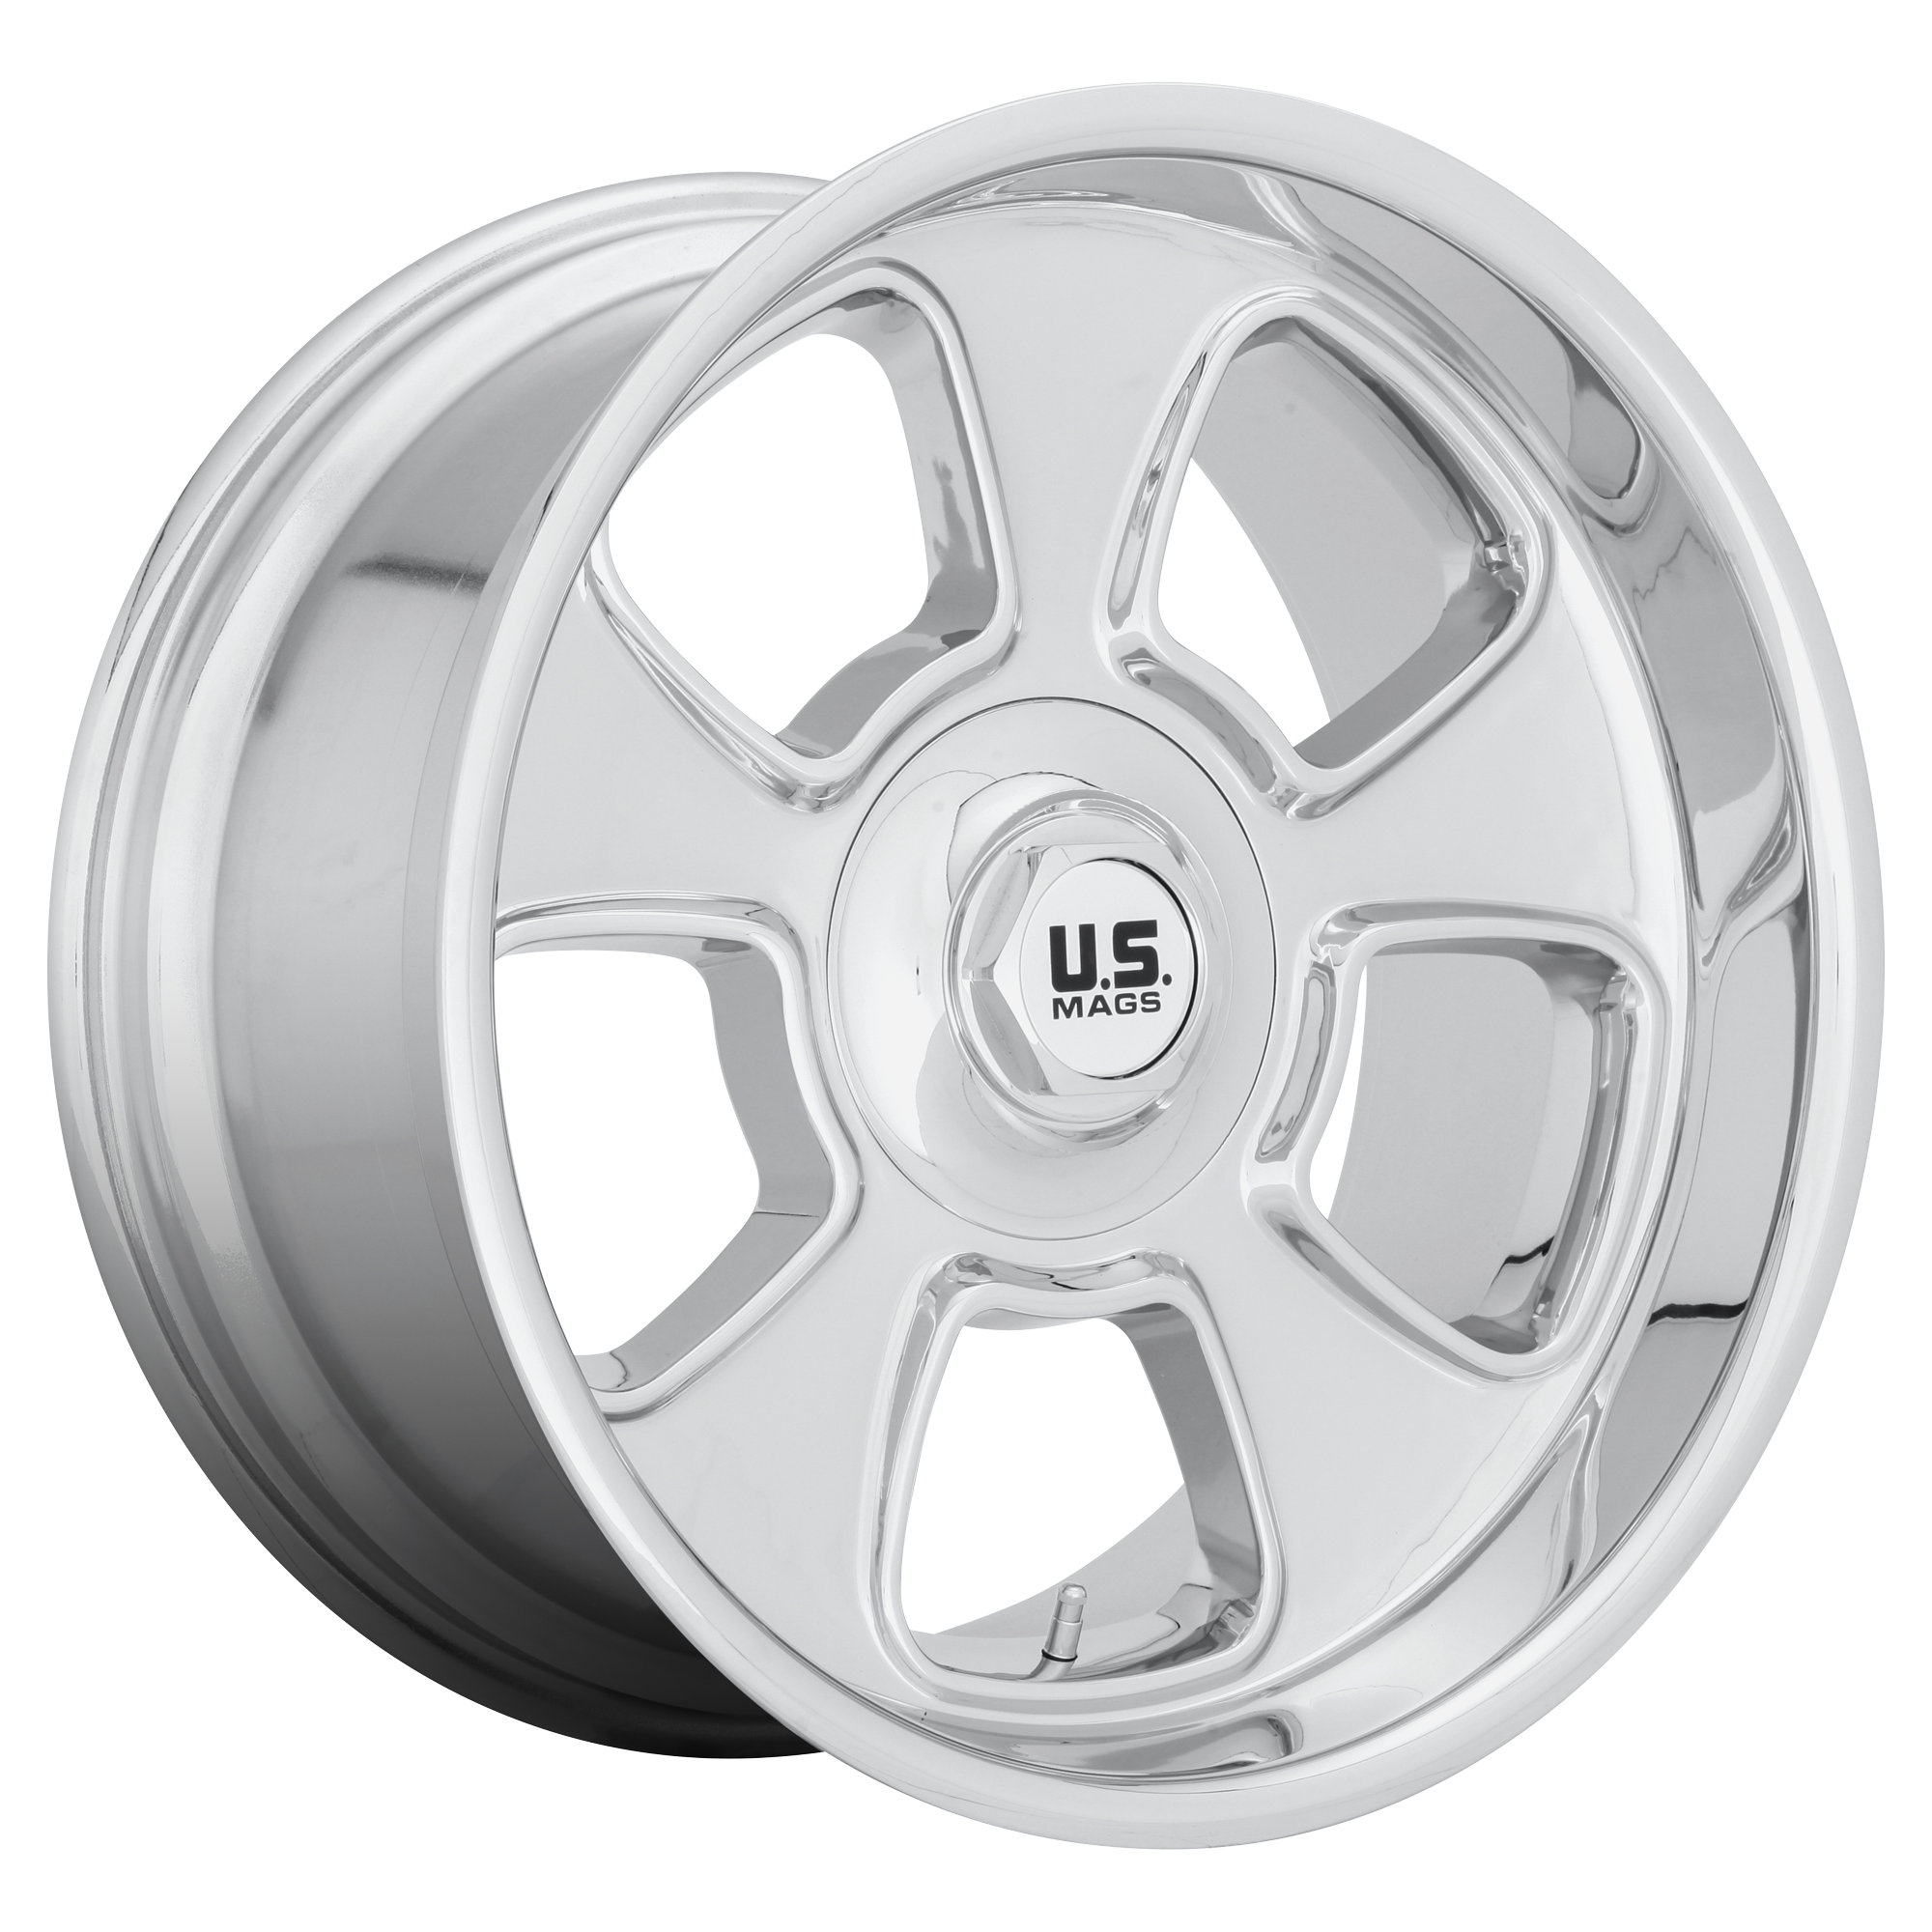 BOULEVARD 20x9.5 5x127.00/5x135.00 CHROME PLATED (1 mm) - Tires and Engine Performance